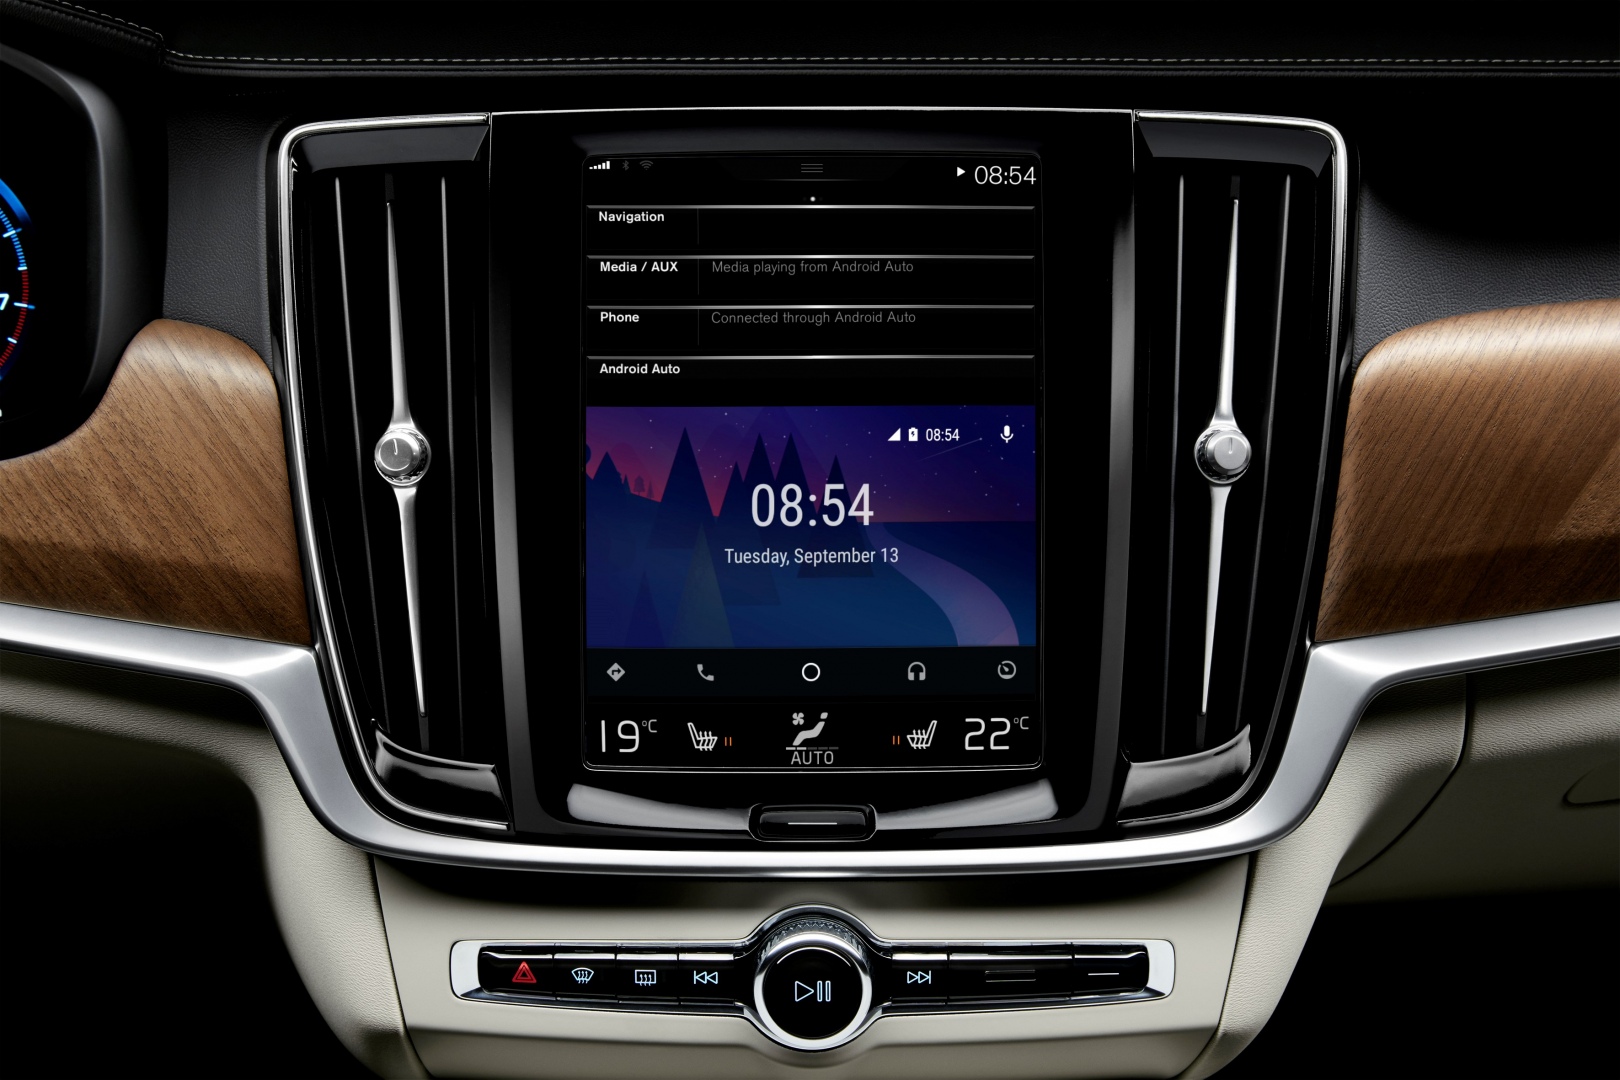 201018_Android_Auto_start_screen